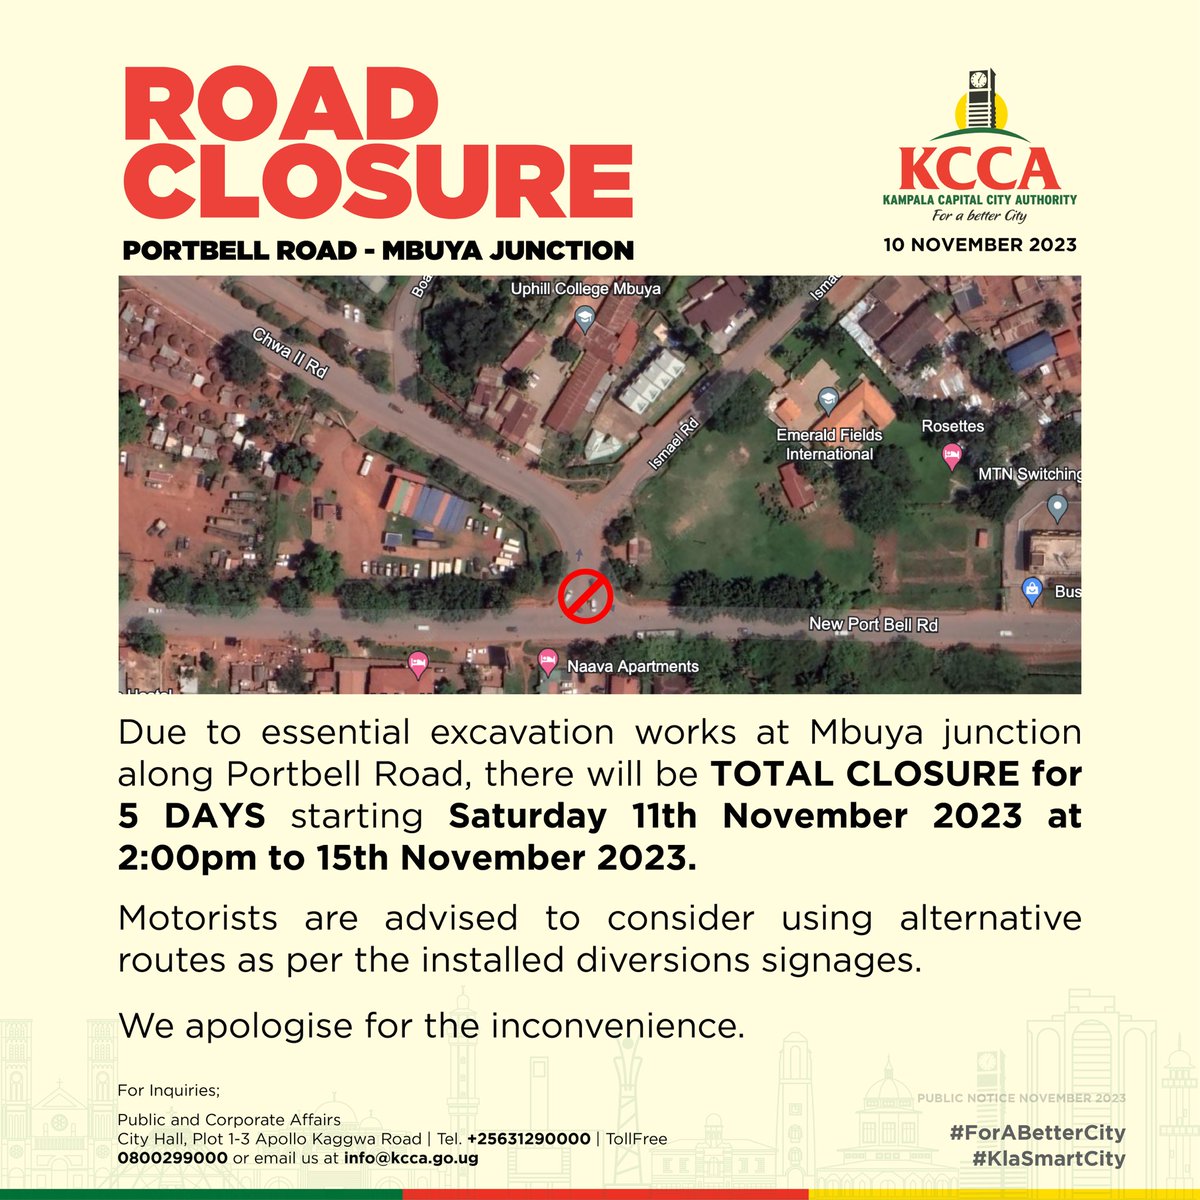 Please take note of this closure at the Port Bell Road - Mbuya Junction. 

All inconveniences are highly regretted. 

#KCCAatWork #ForABetterCity.